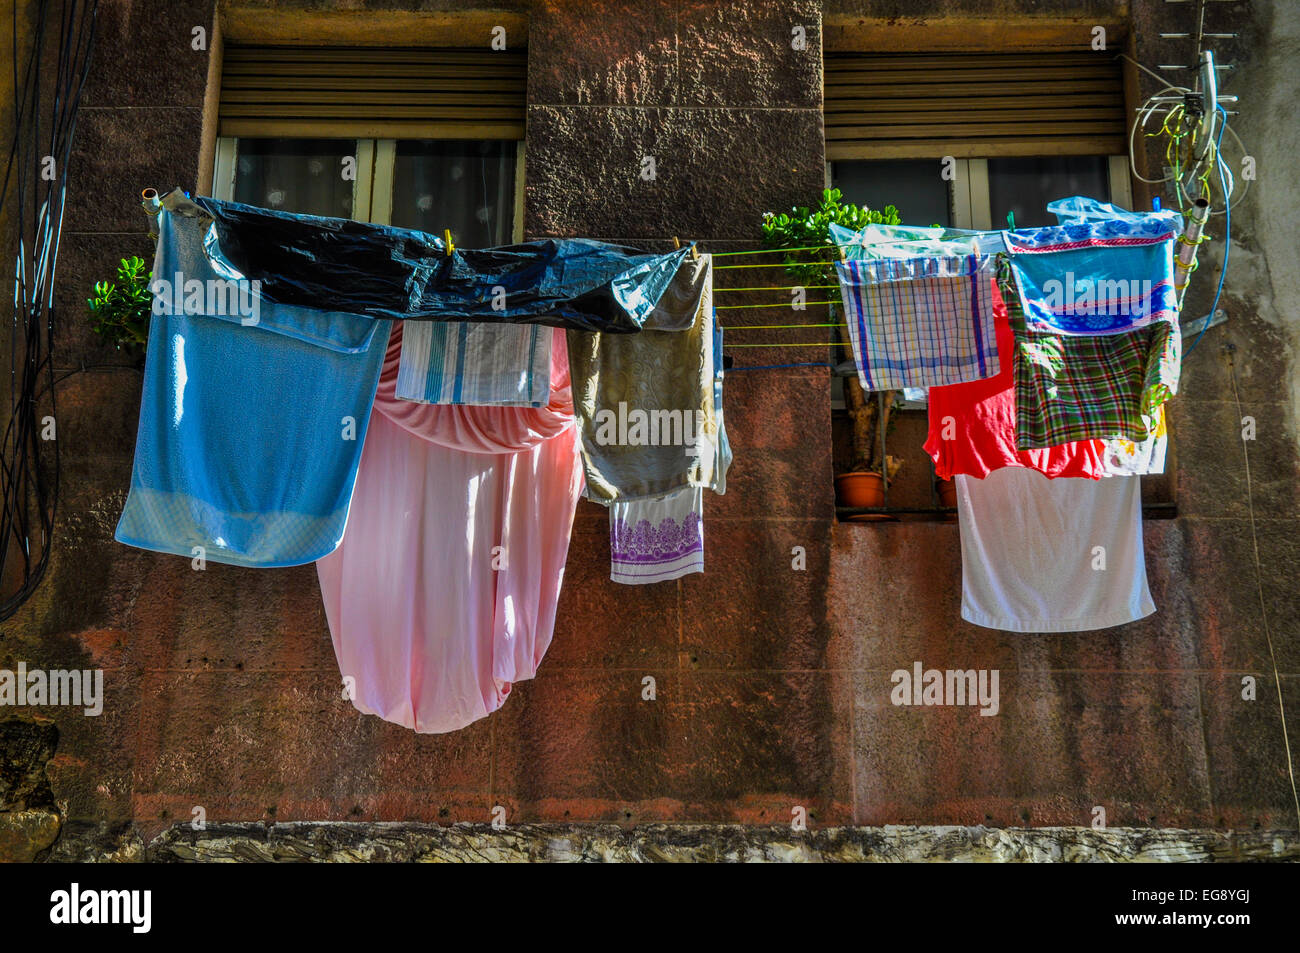 clothes laundry hanging out to dry in Barcelona Spain Stock Photo